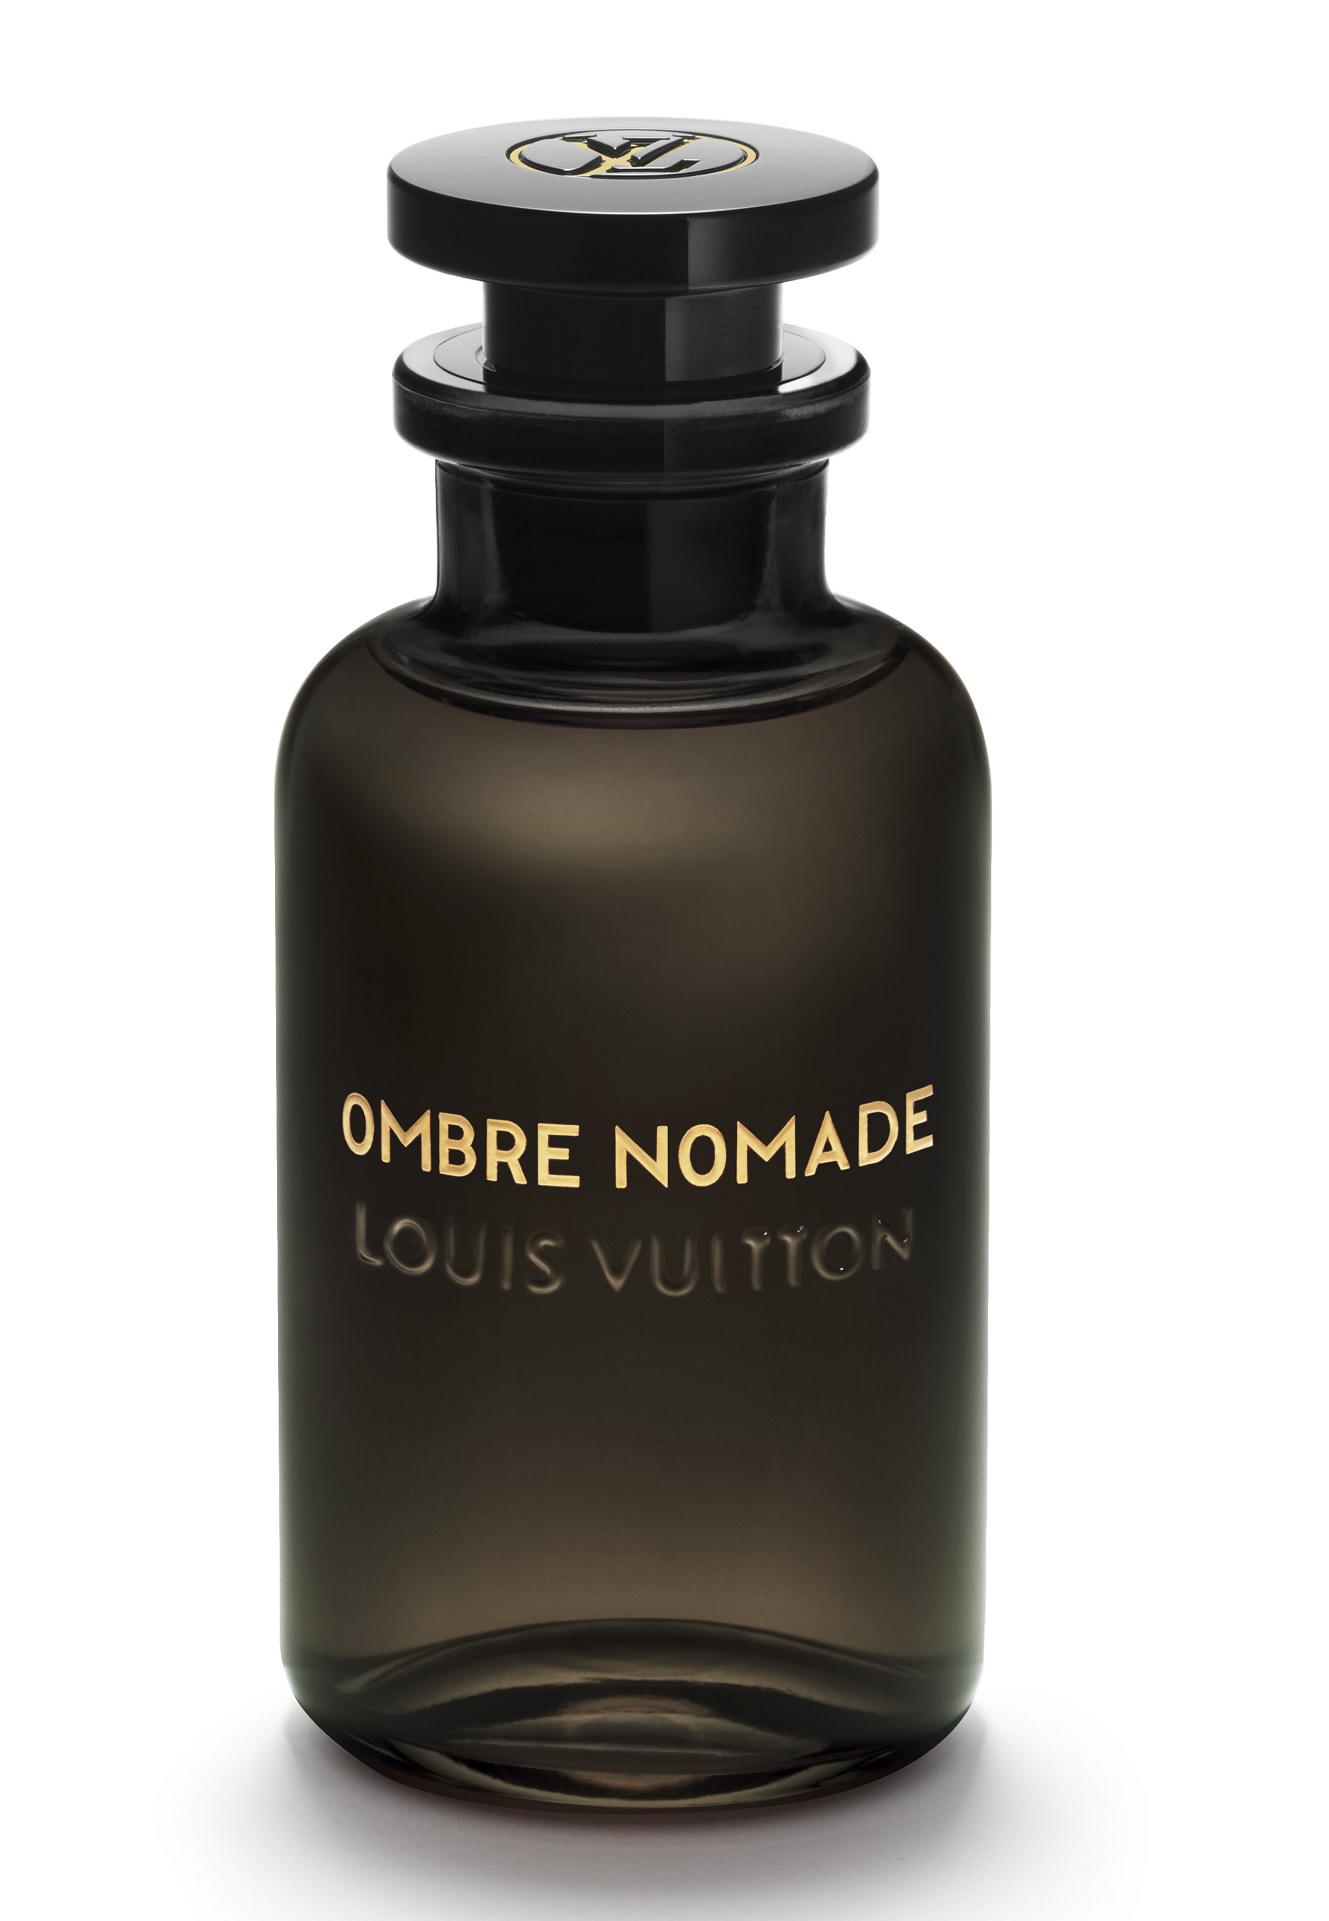 Ombre Nomade Louis Vuitton perfume - a new fragrance for women and men 2018